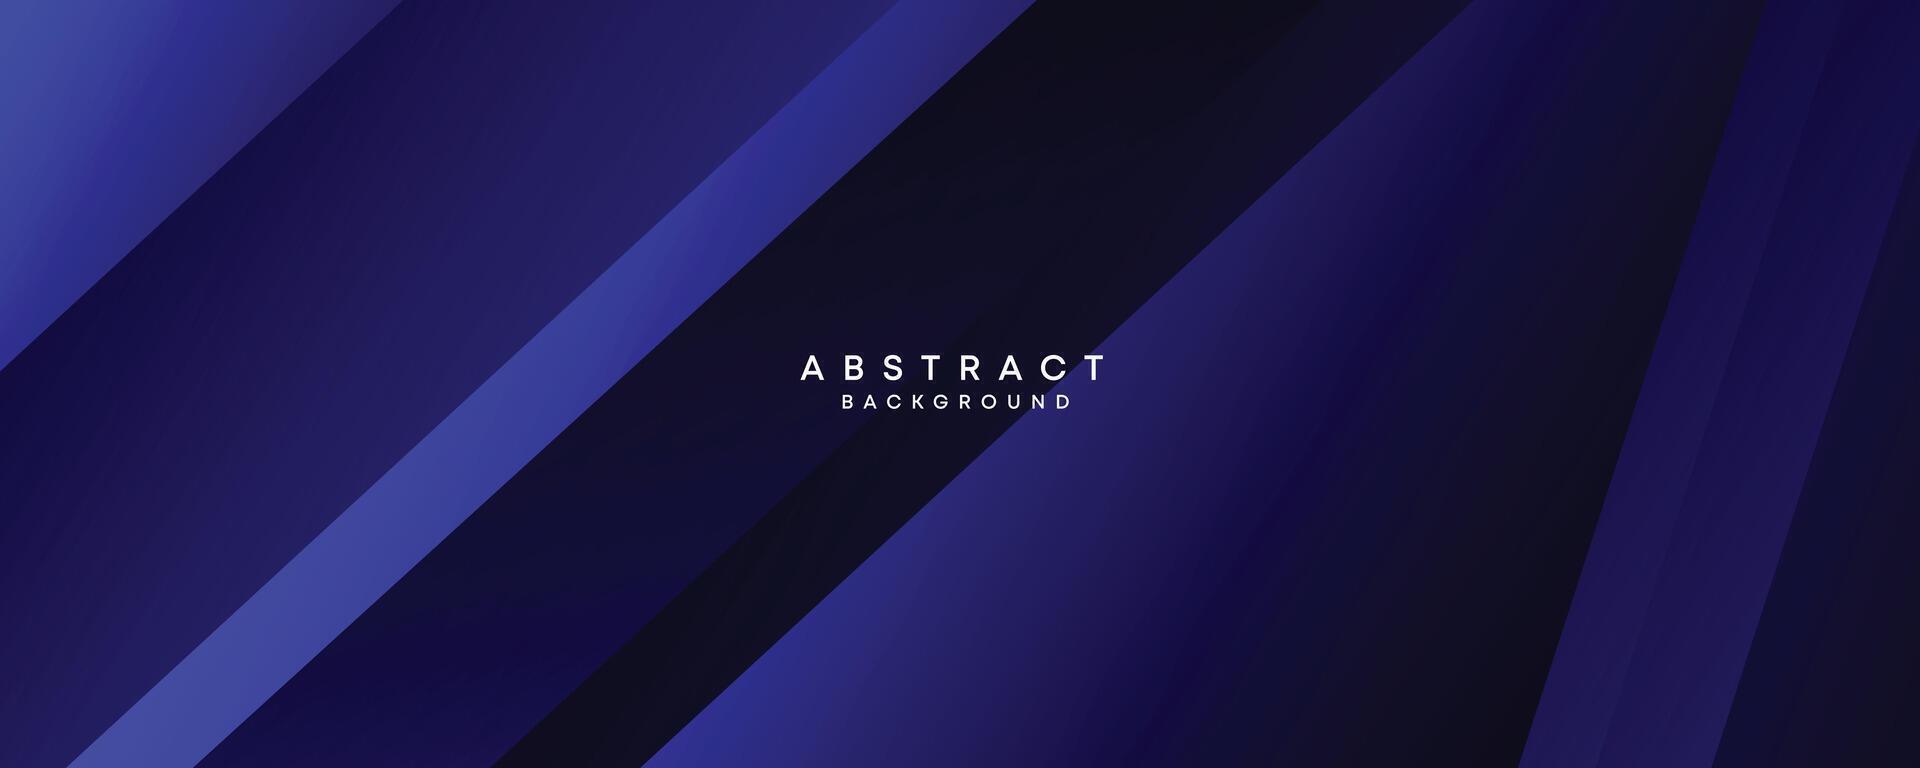 diagonal geometric overlay layer on an abstract dark blue banner design background. Contemporary graphic elements in the shape of squares. Makes a good cover, header, banner, brochure, or website vector